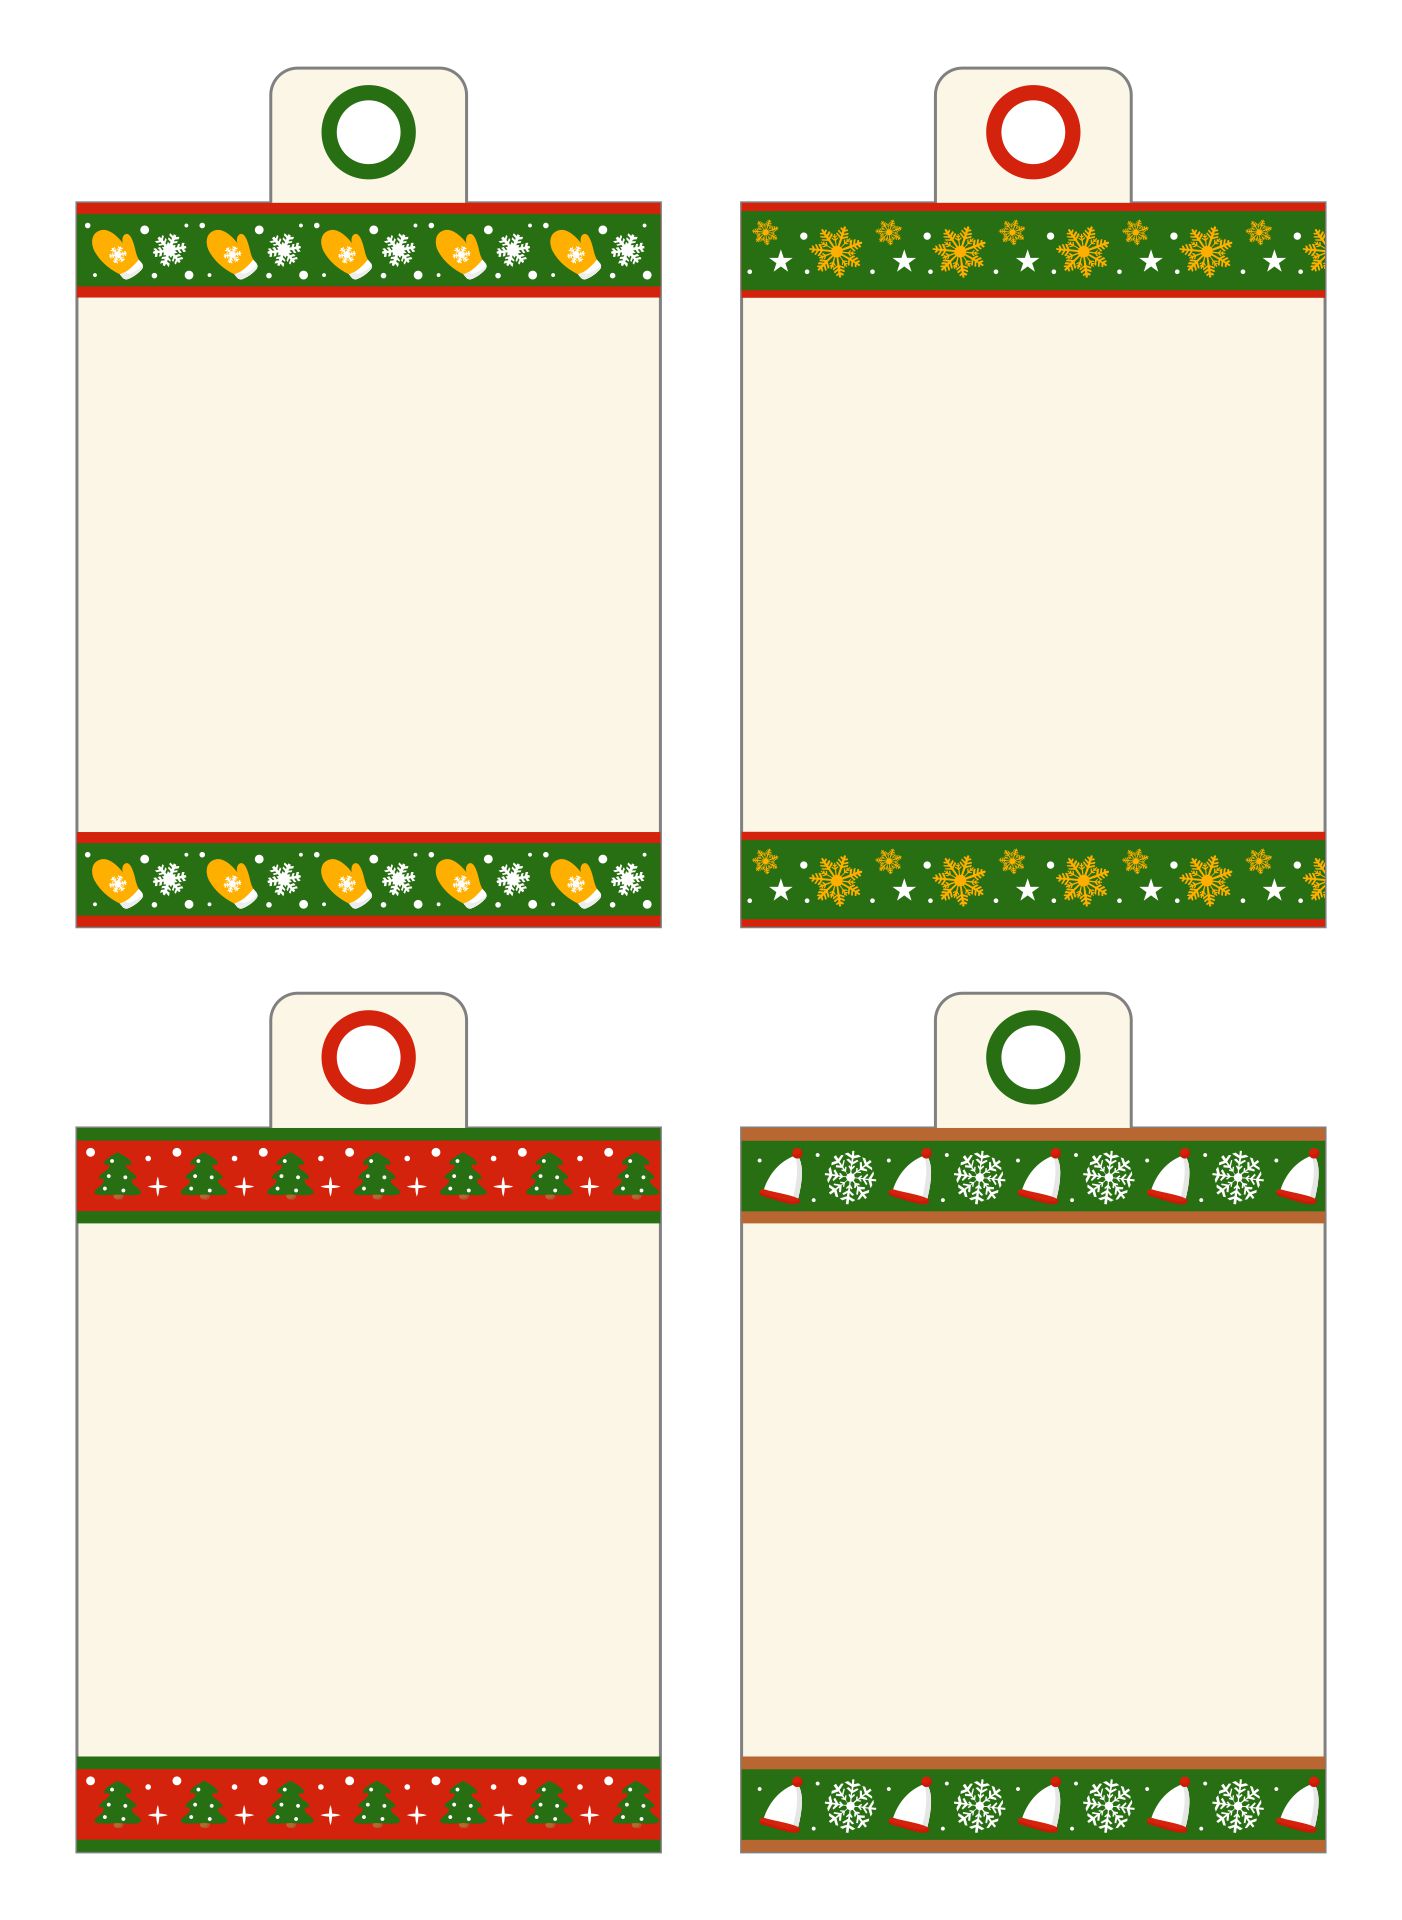 Blank Gift Tag Template Free